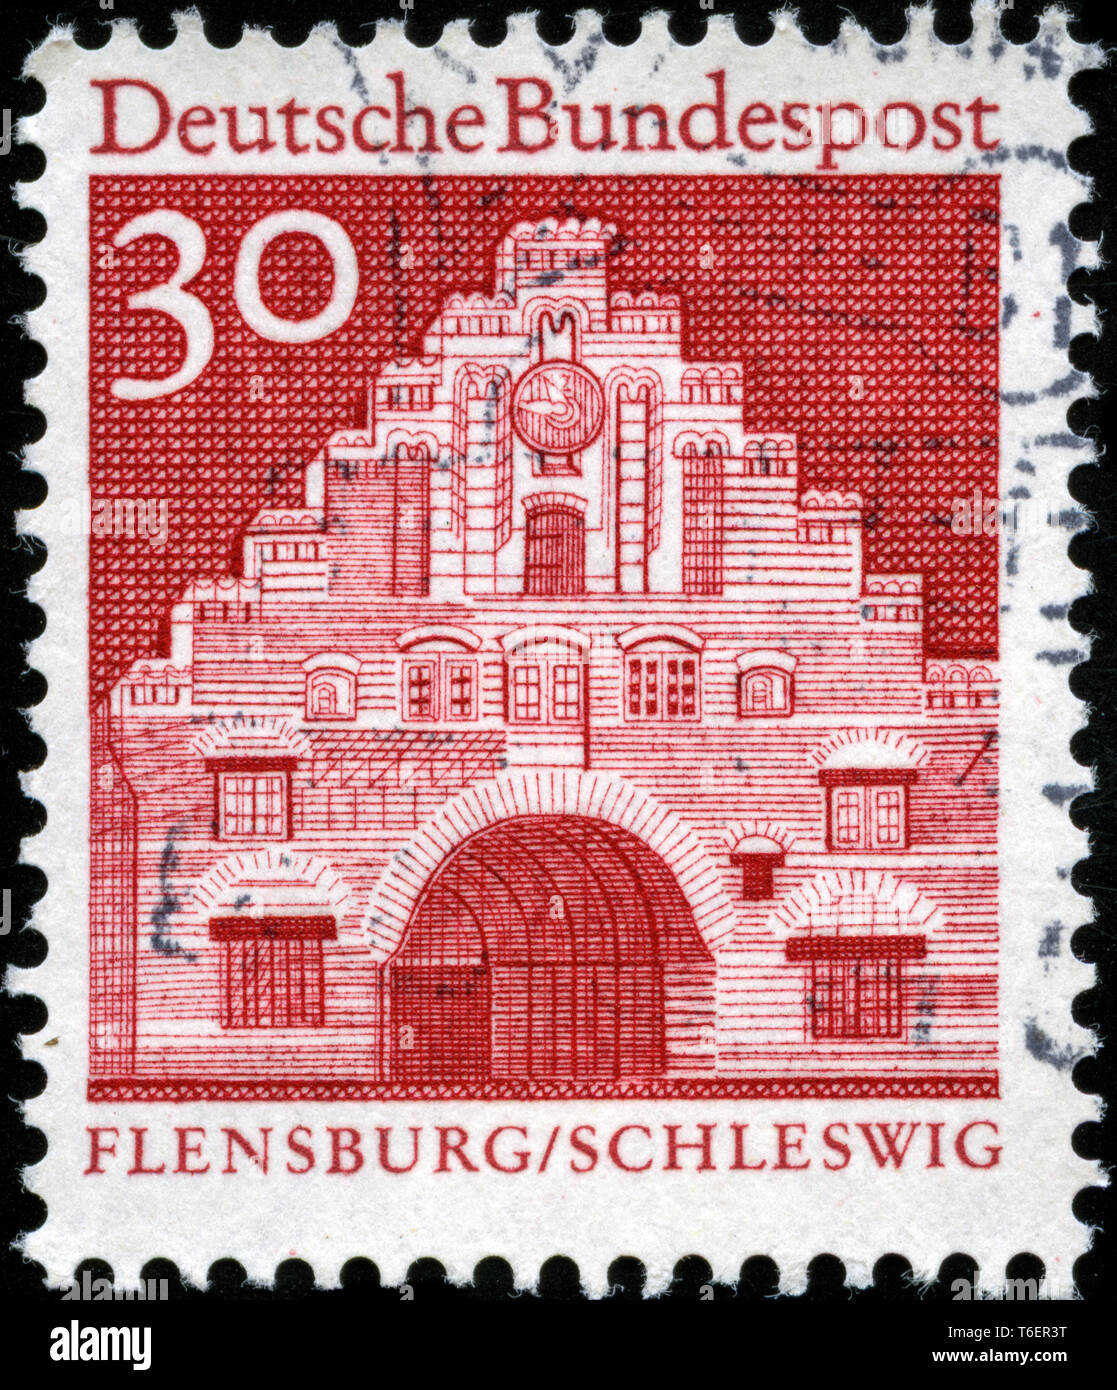 Postage stamp from the Federal Republic of Germany in the German buildings from twelve centuries, large size series issued in 1967 Stock Photo